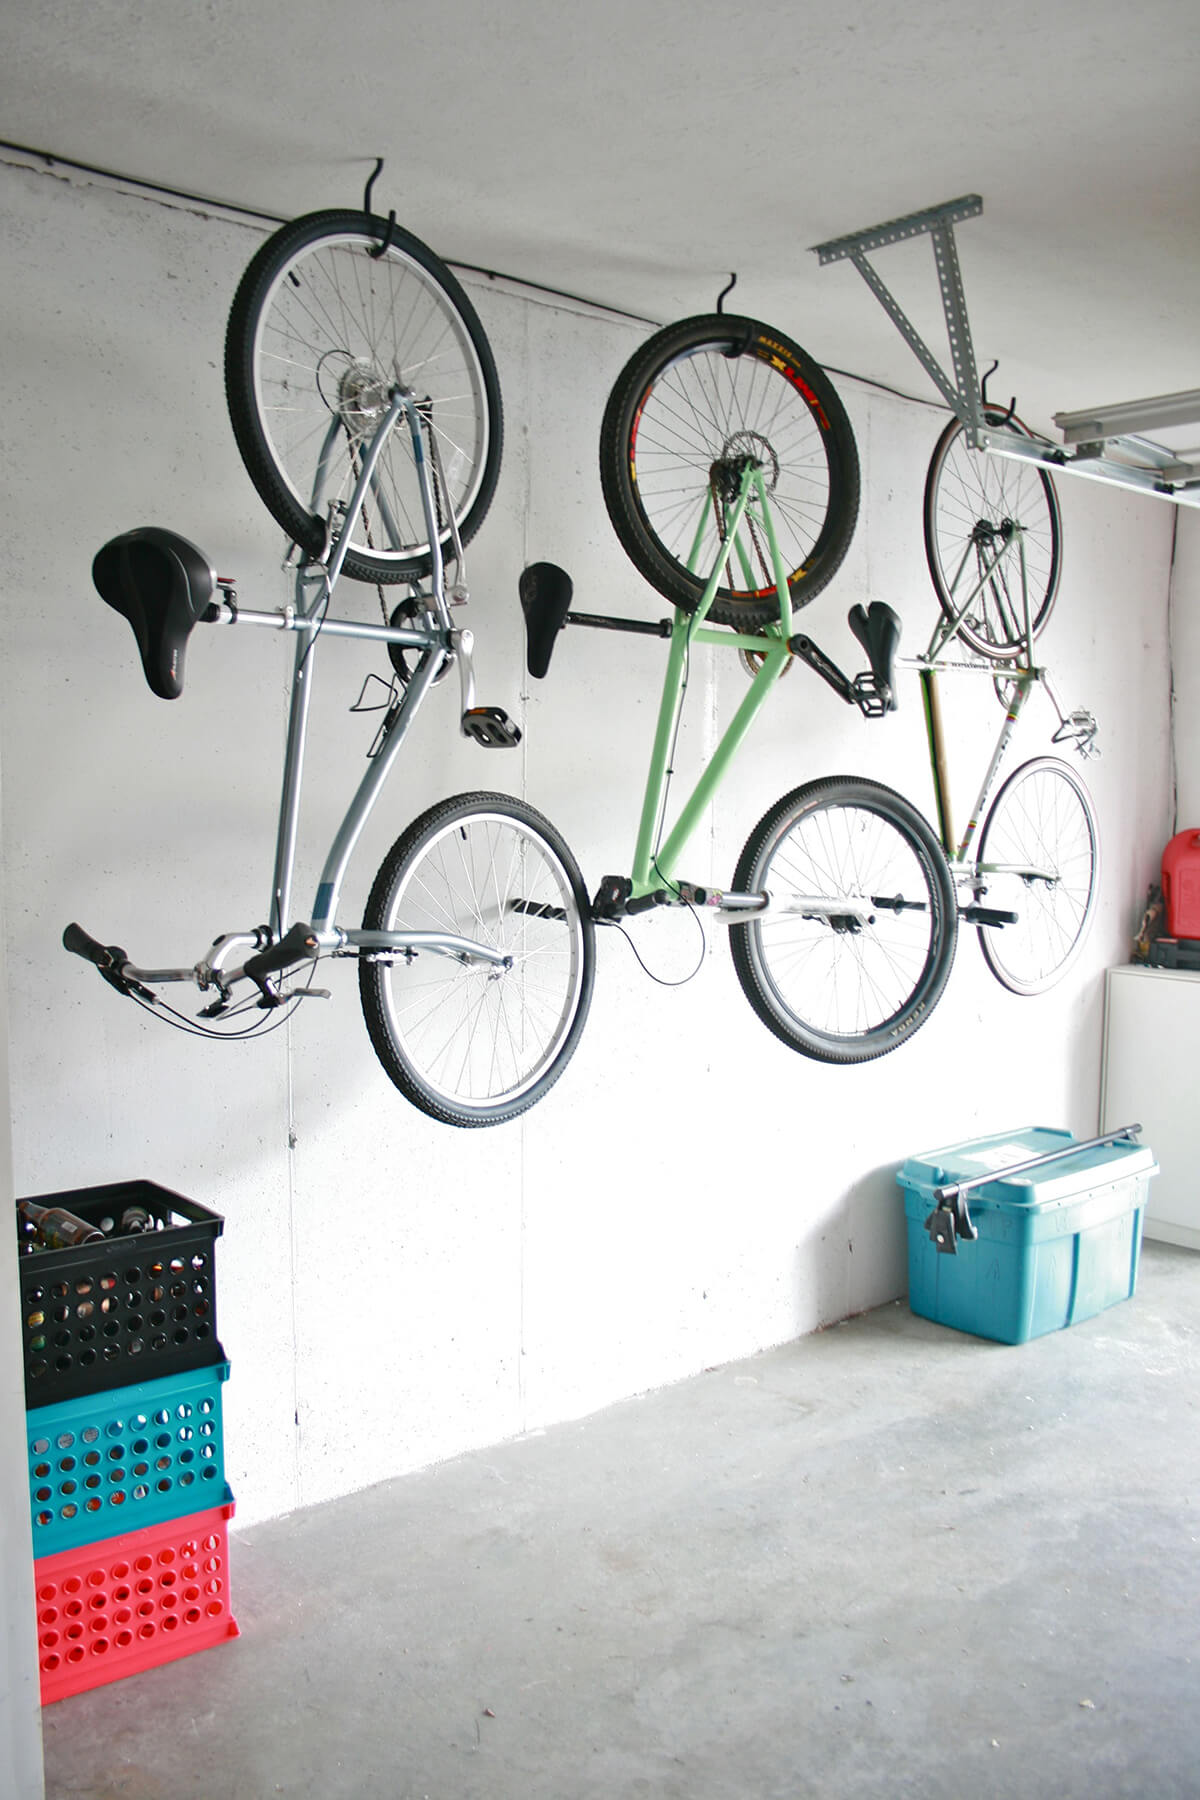 Storing Bicycles from the Garage Ceiling